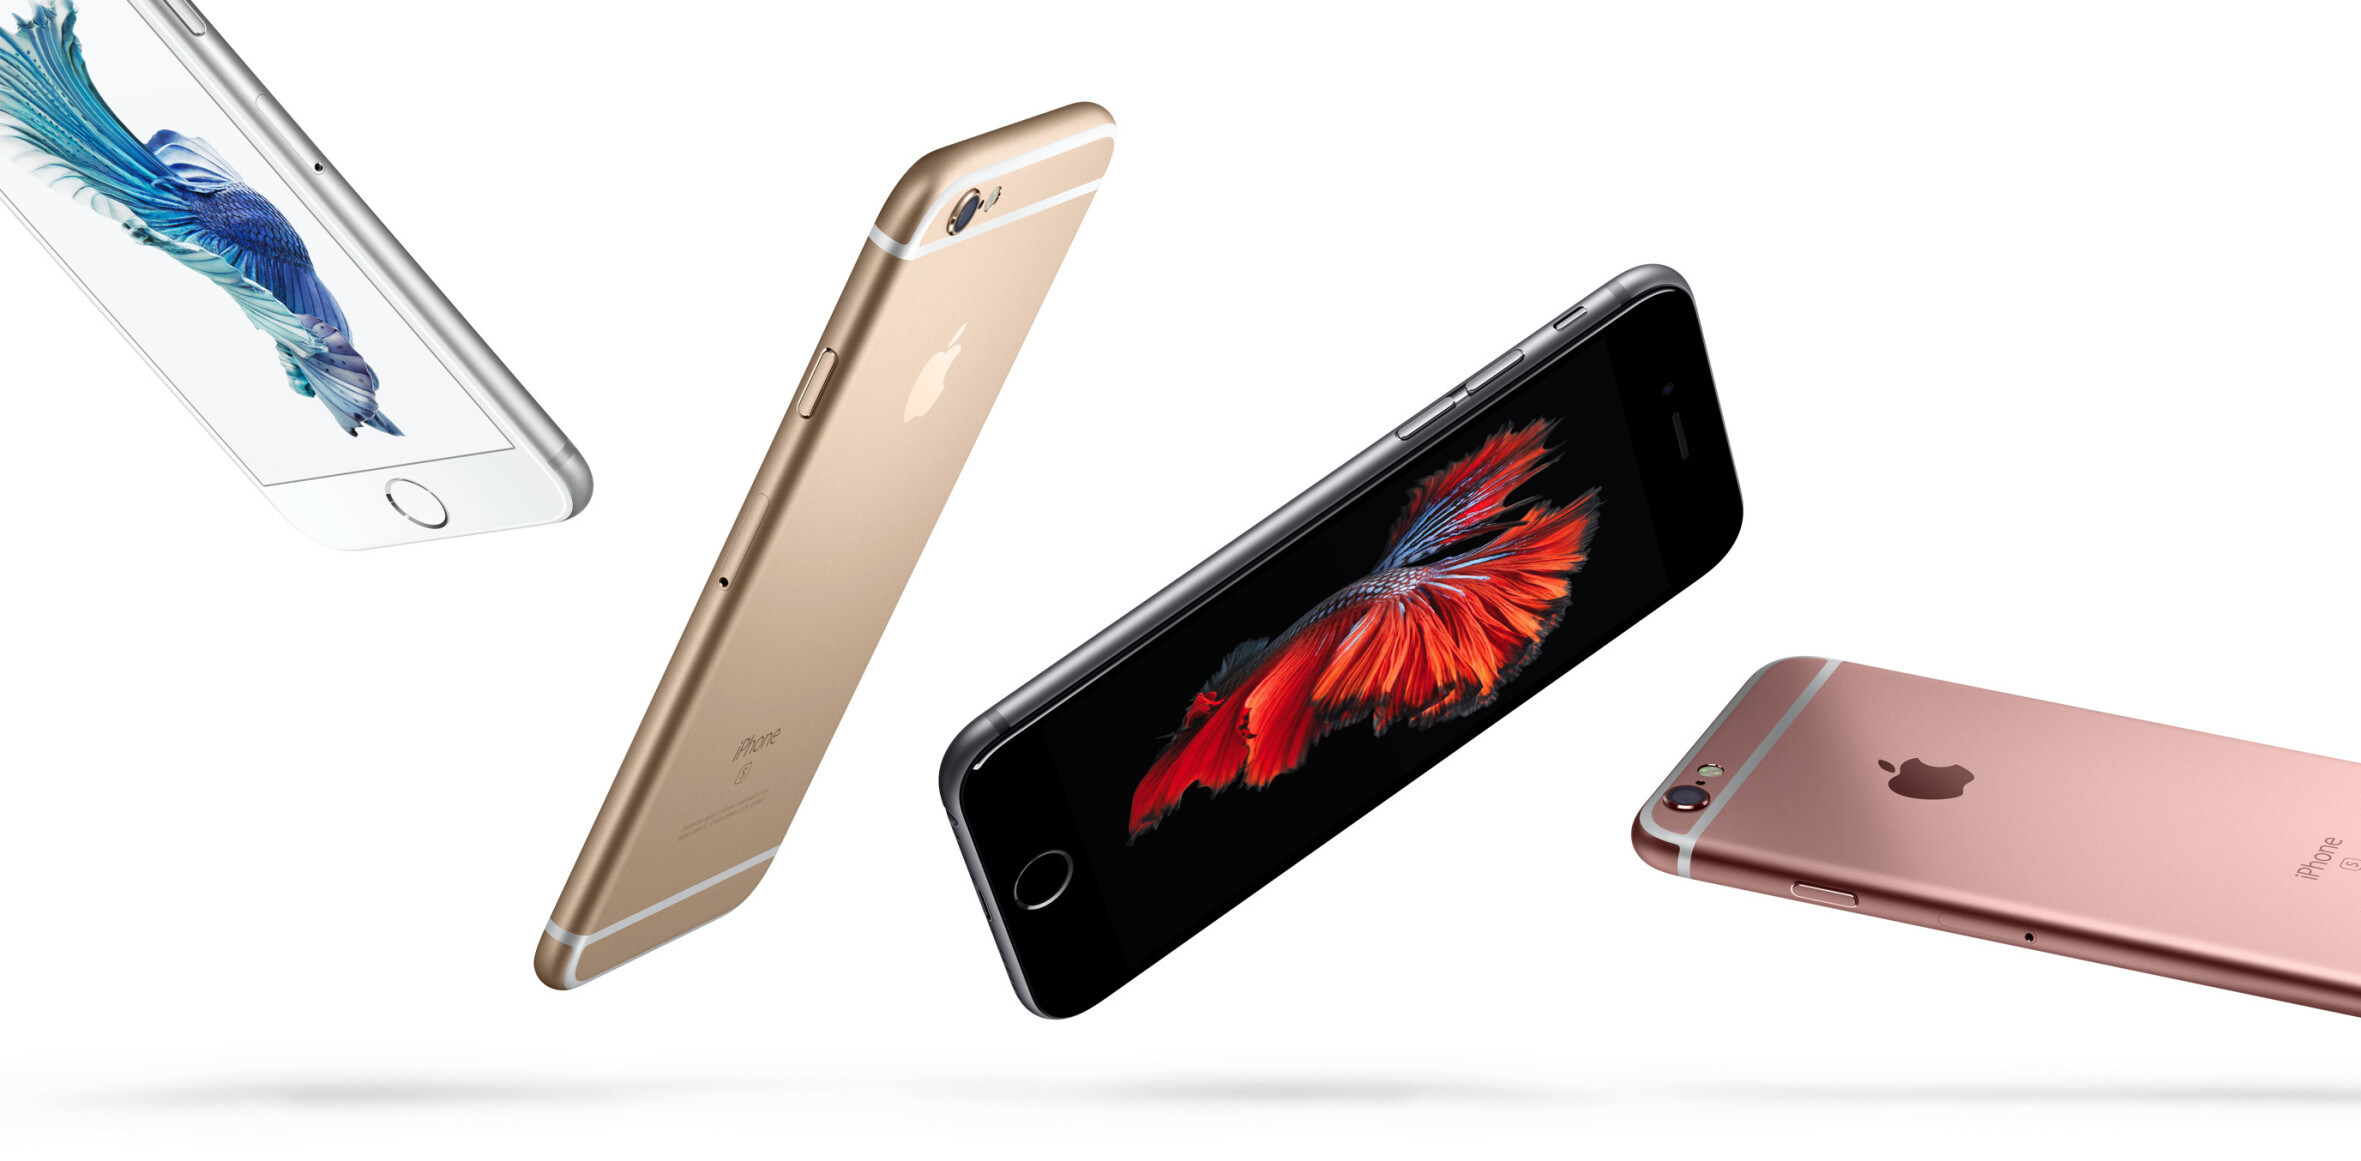 Apple introduces the iPhone 6s and 6s Plus in rose gold, with 3D Touch and animated wallpaper